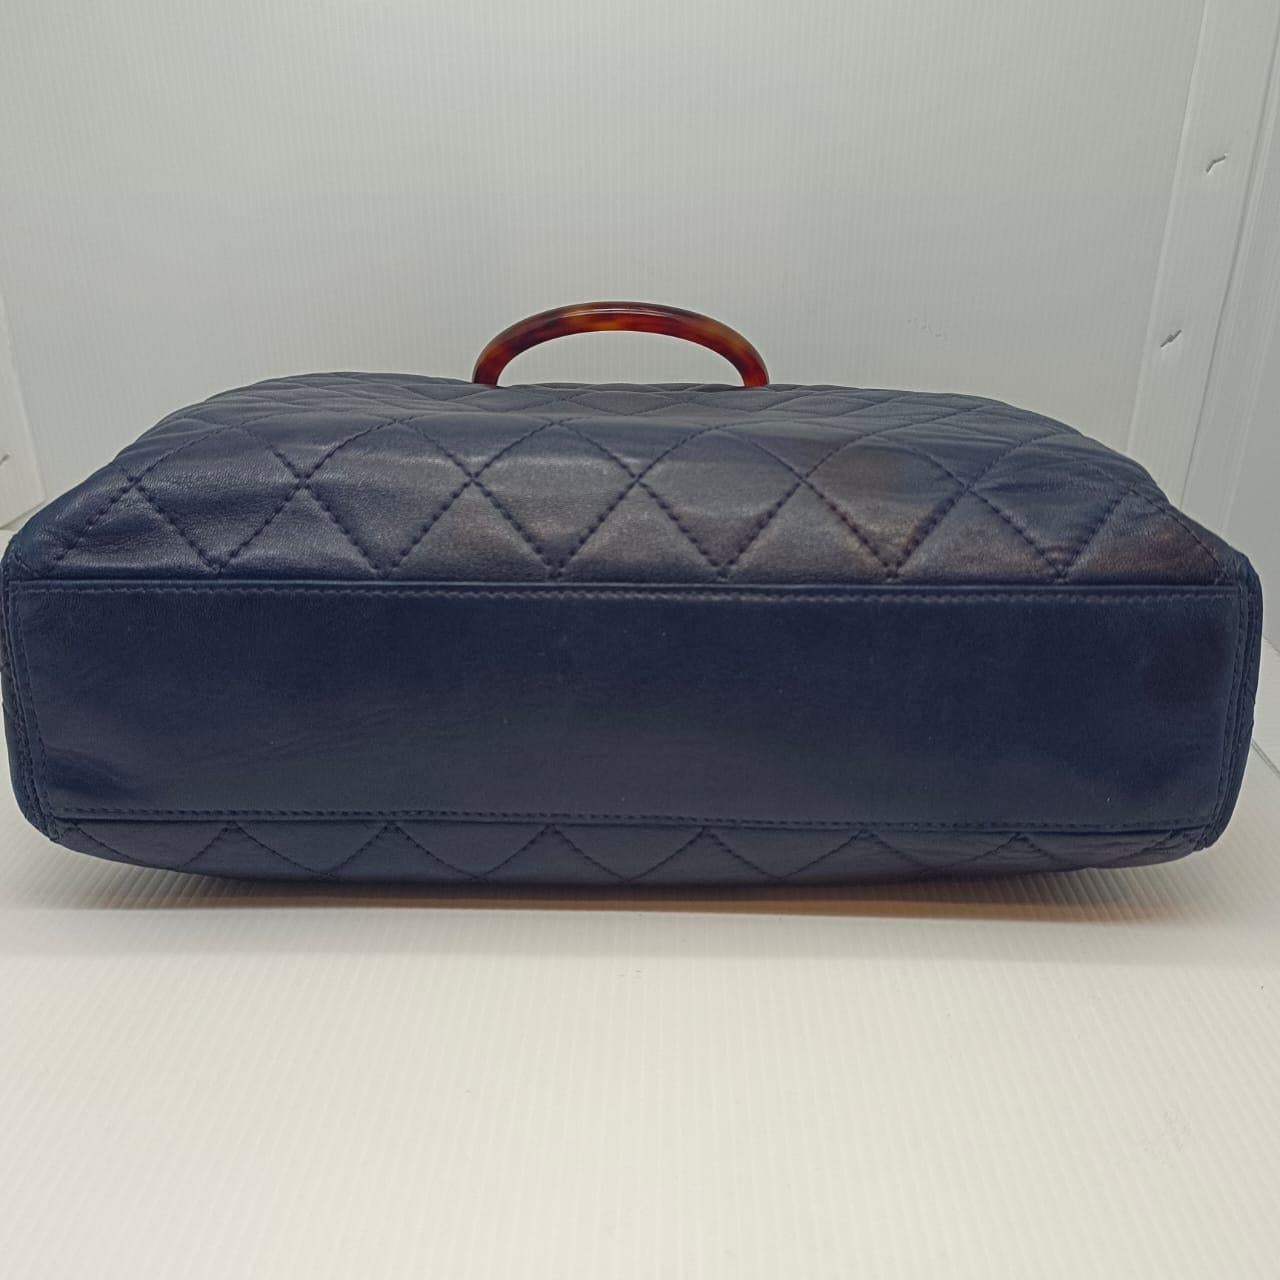 Vintage Chanel Navy Lambskin Quilted Tote with Tortoiseshell Handles For Sale 5